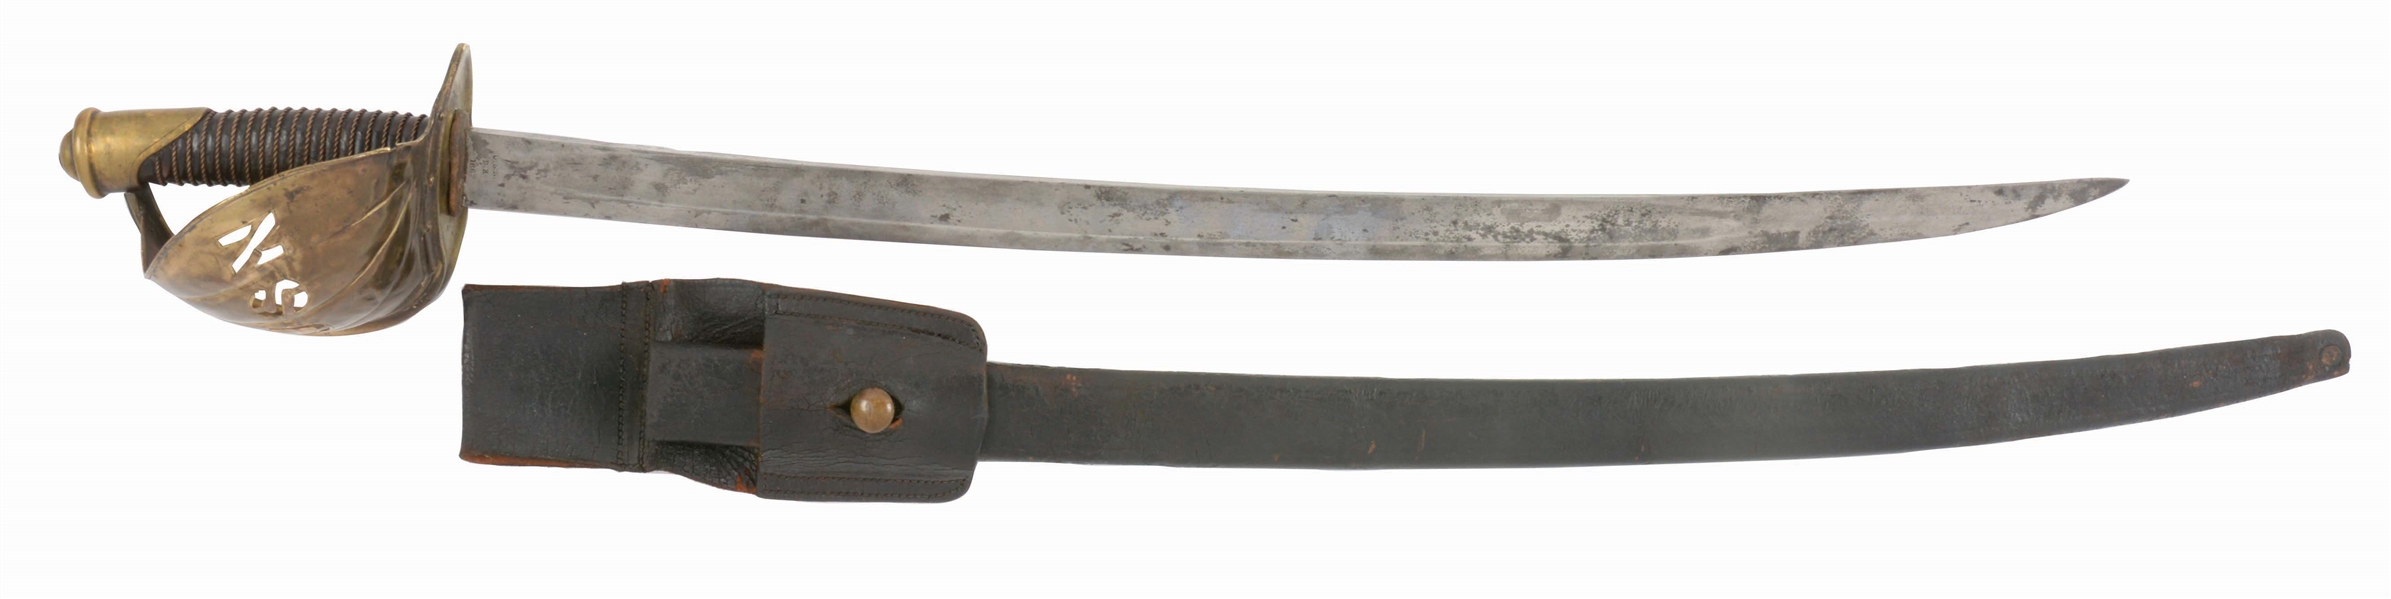 RARE U.S. MODEL 1860 NAVAL OFFICERS CUTLASS WITH SCABBARD.